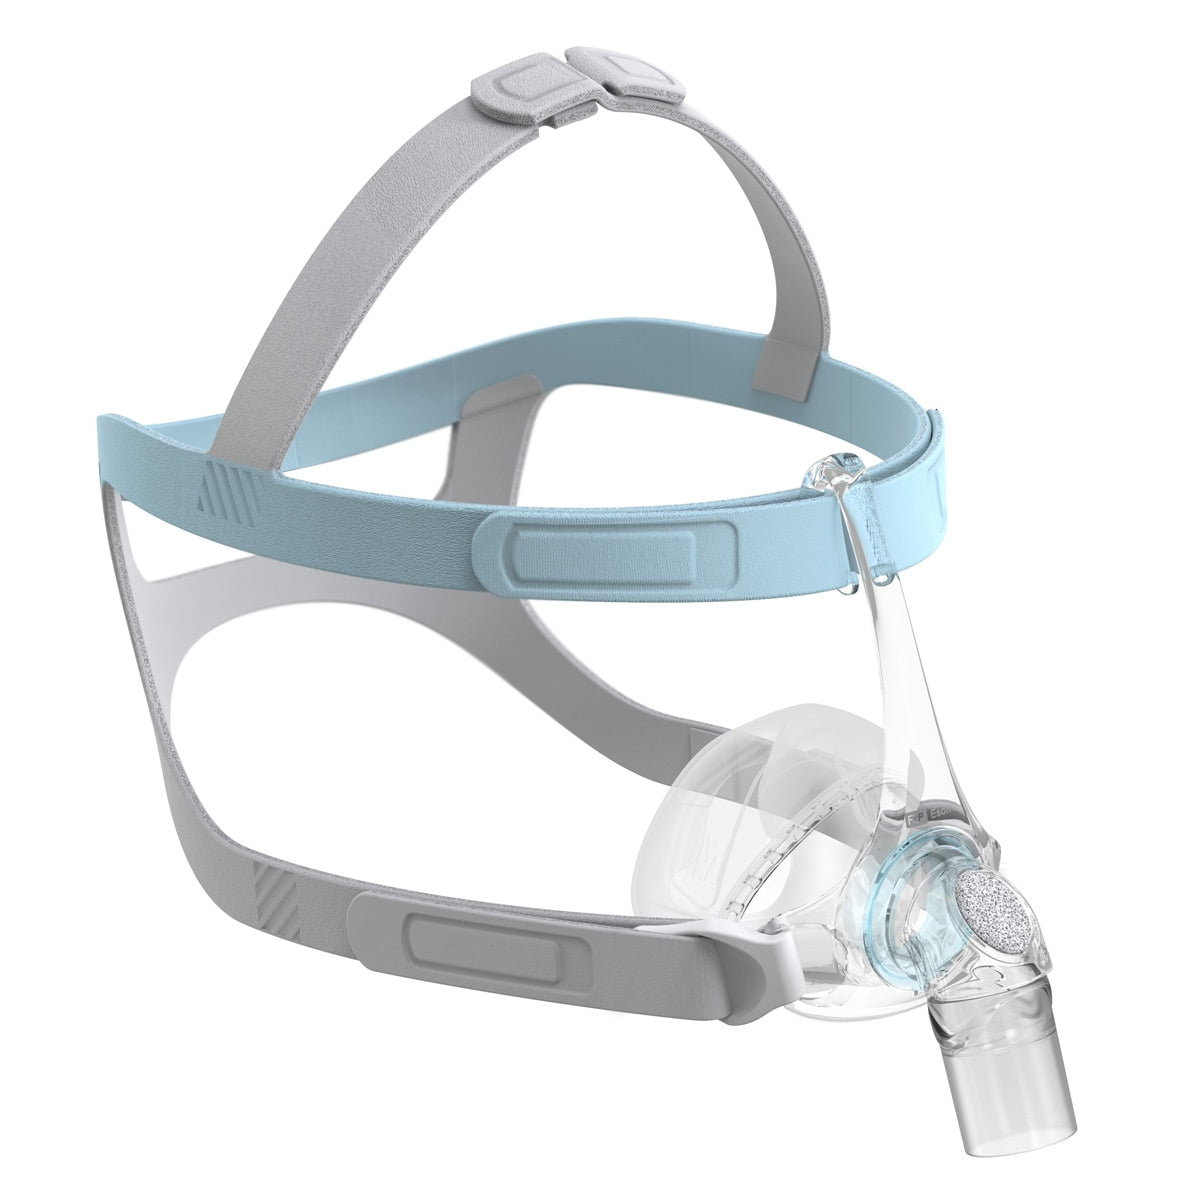 F&P Eson 2 Nasal CPAP/BiPAP Mask with Headgear